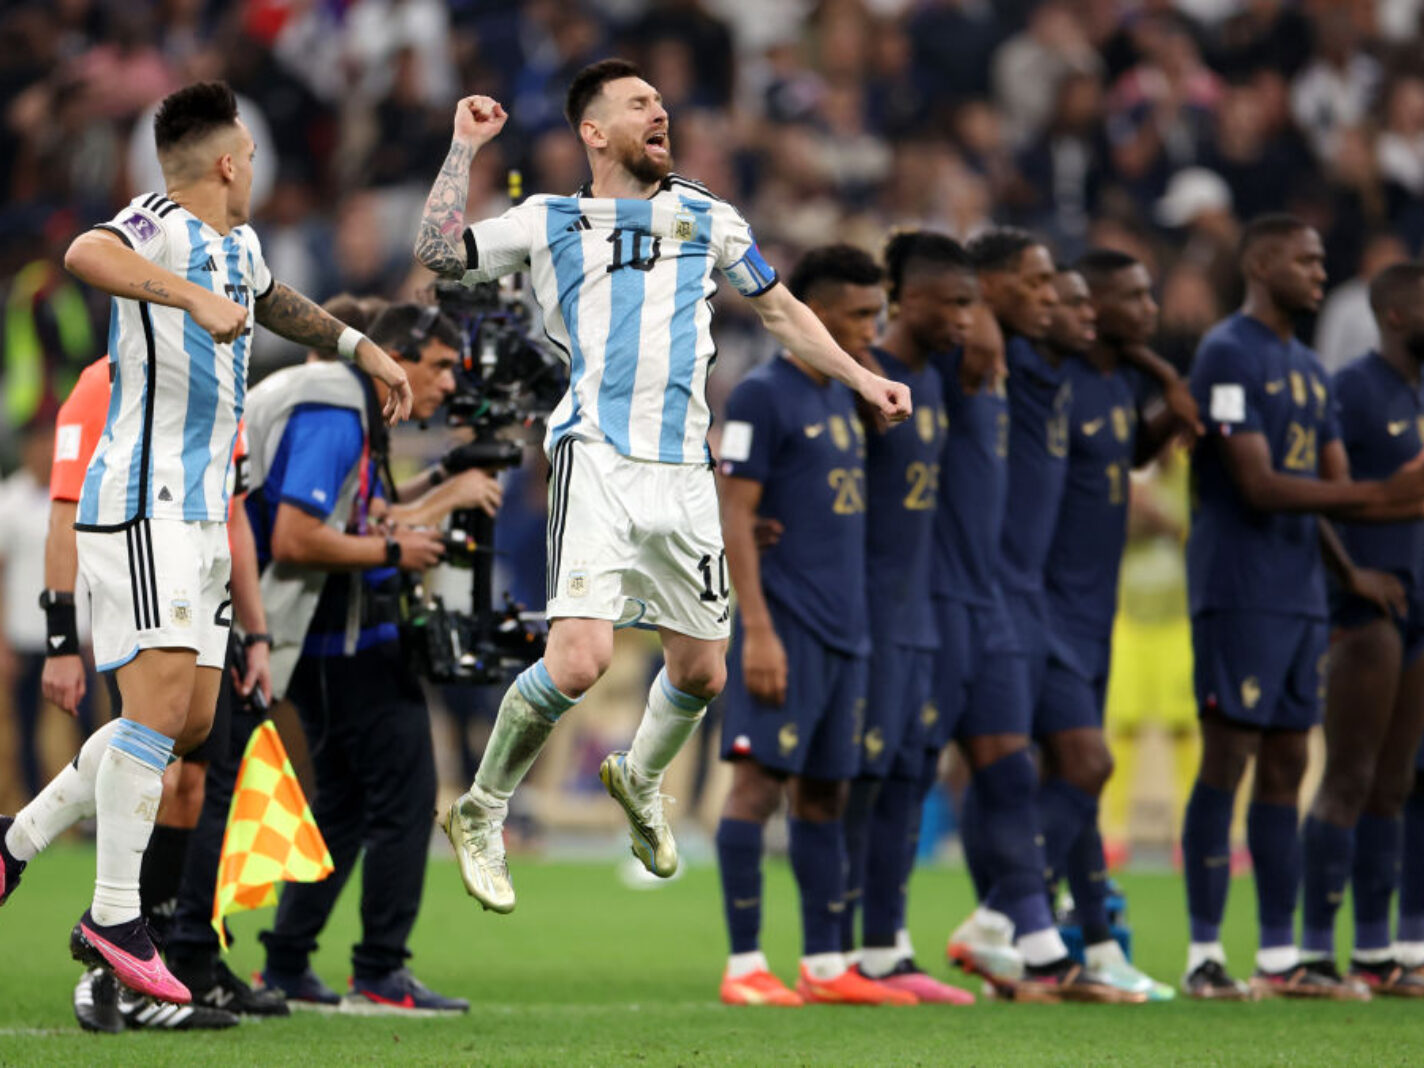 Argentina vs France: Who Win FIFA World Cup 22